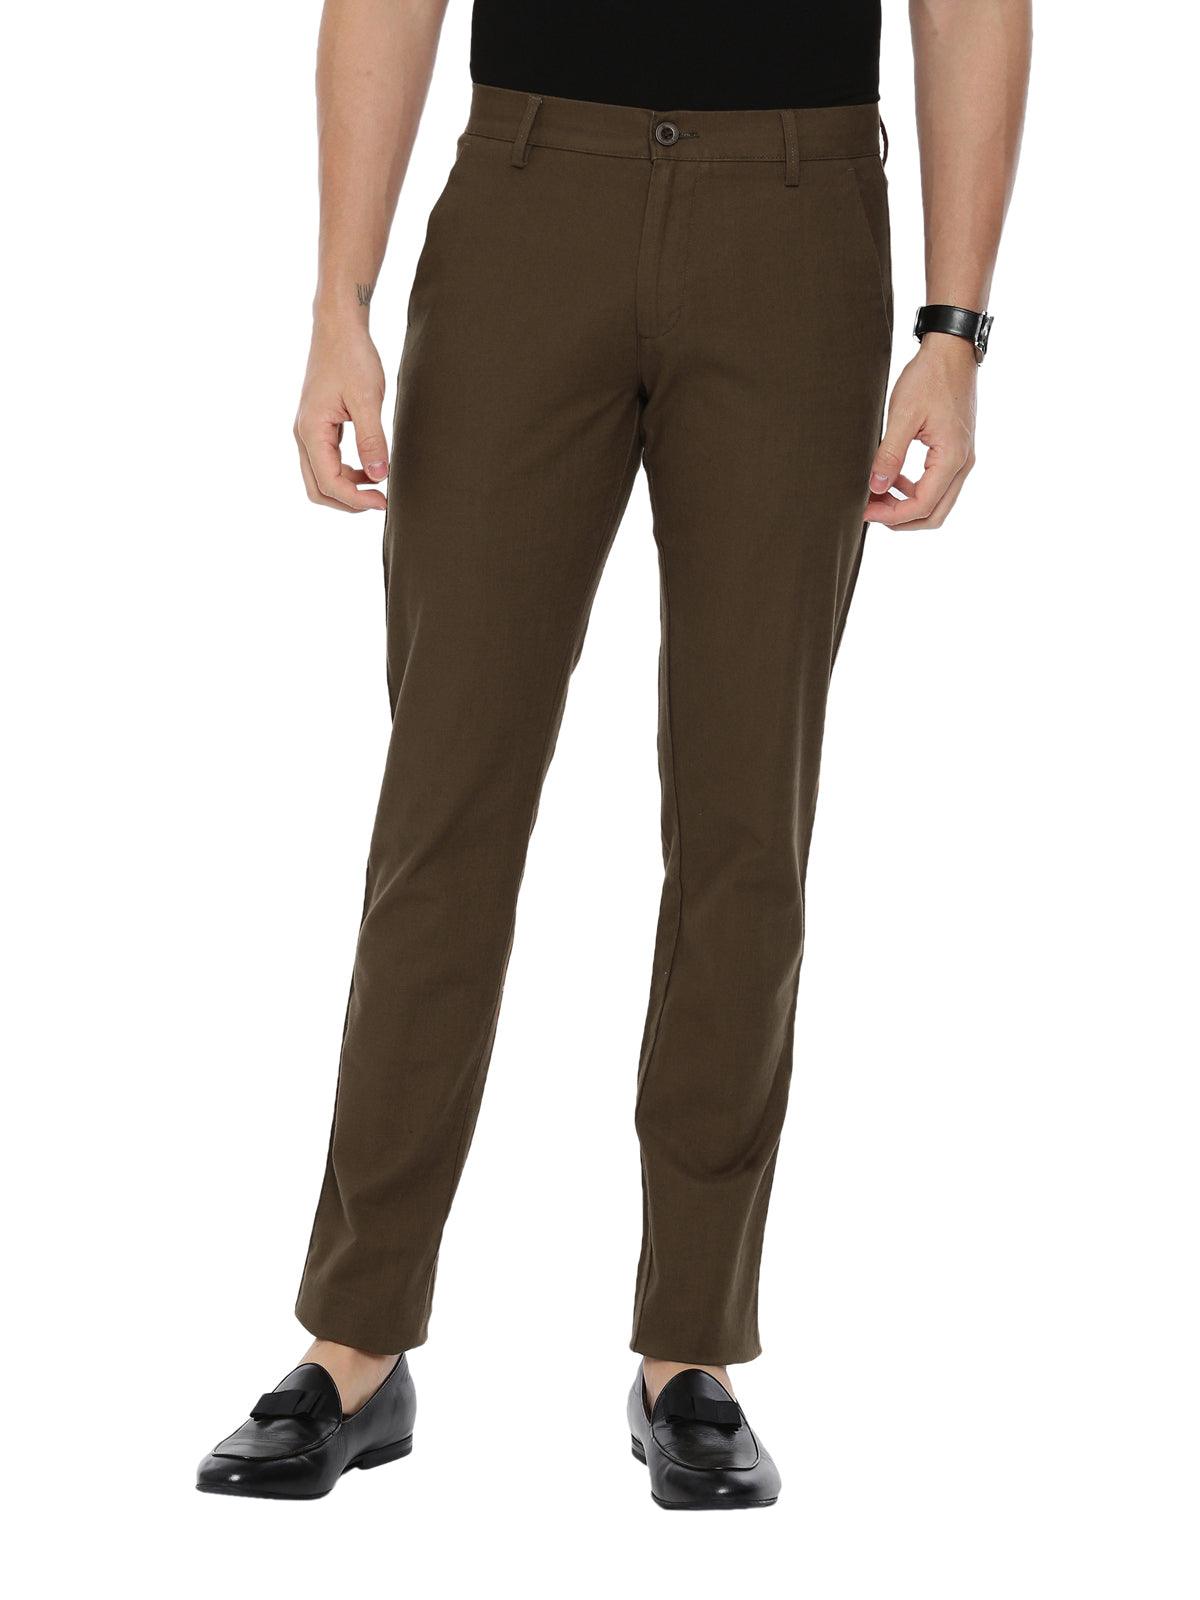 Mufti Cotton Trousers - Buy Mufti Cotton Trousers online in India